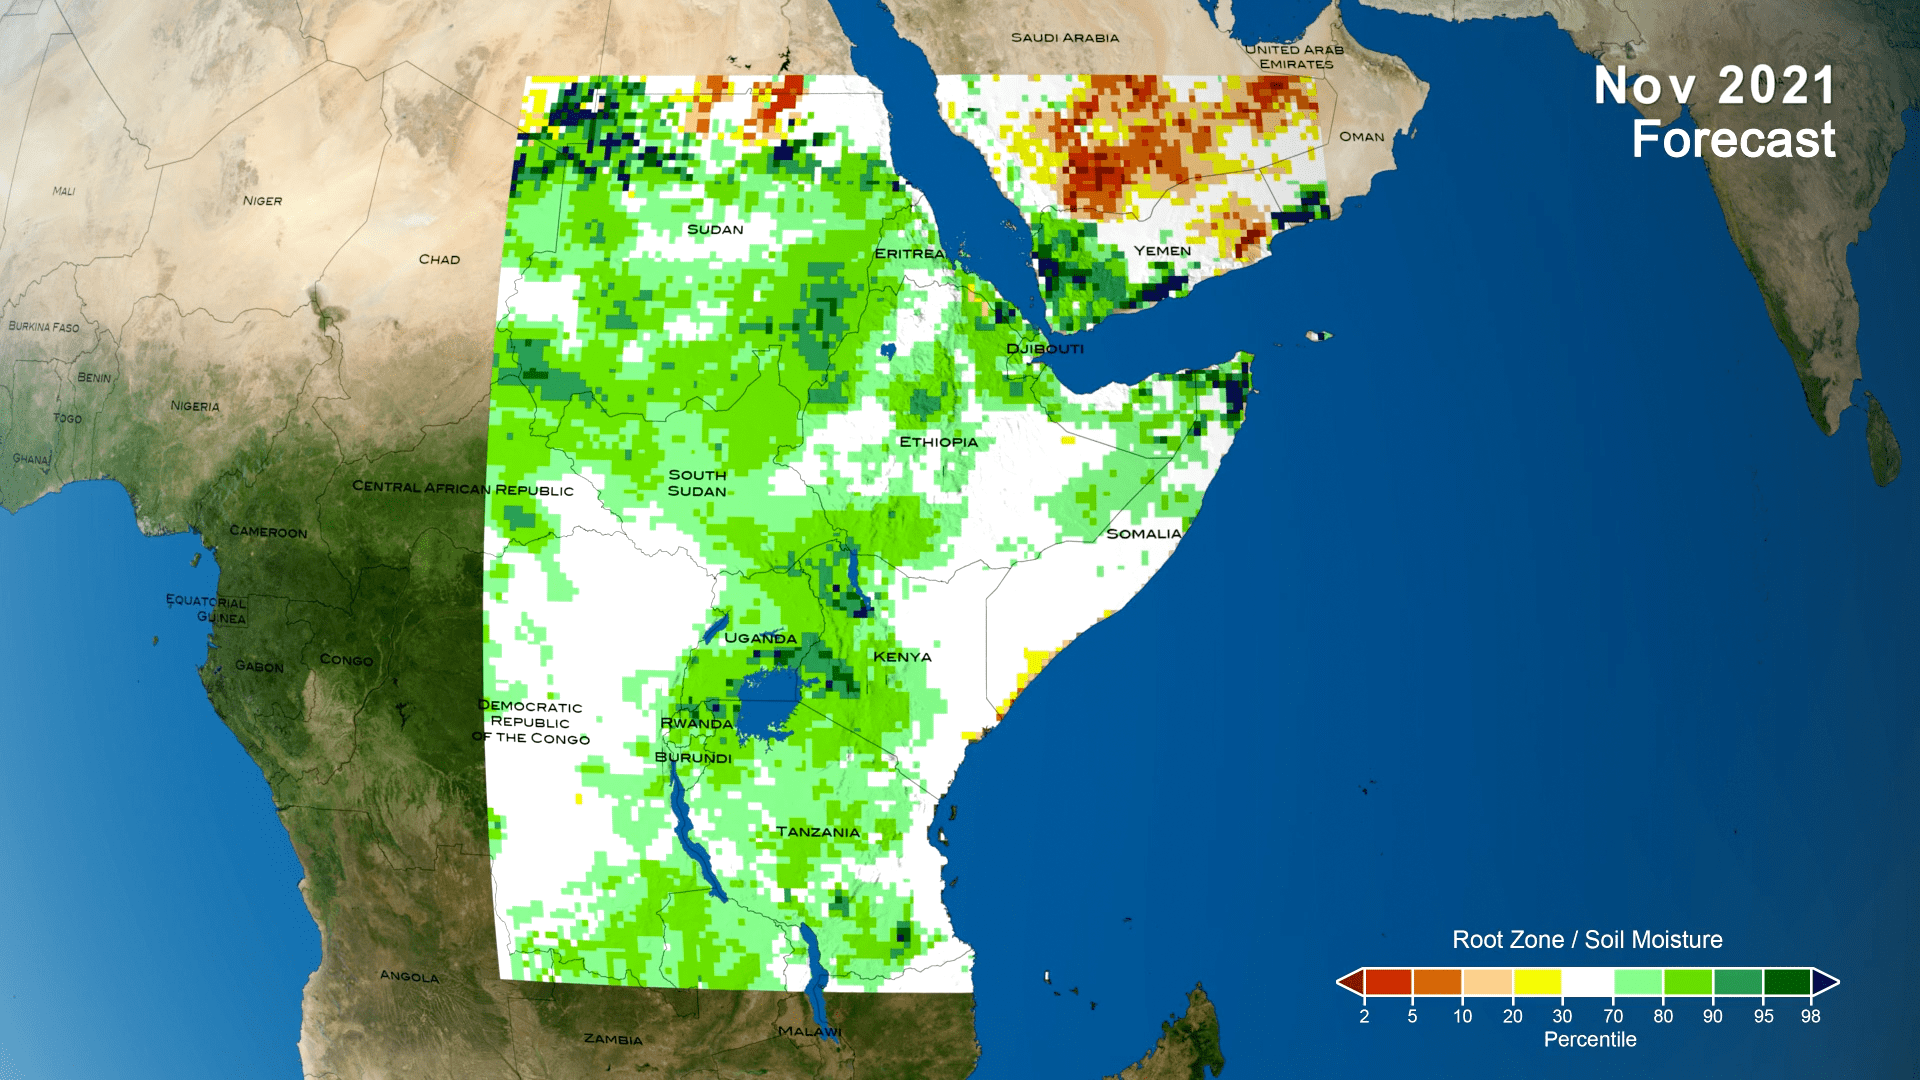 An illustration showing the drought potential over East Africa from the NASA Hydrological Forecast System and Analysis System.